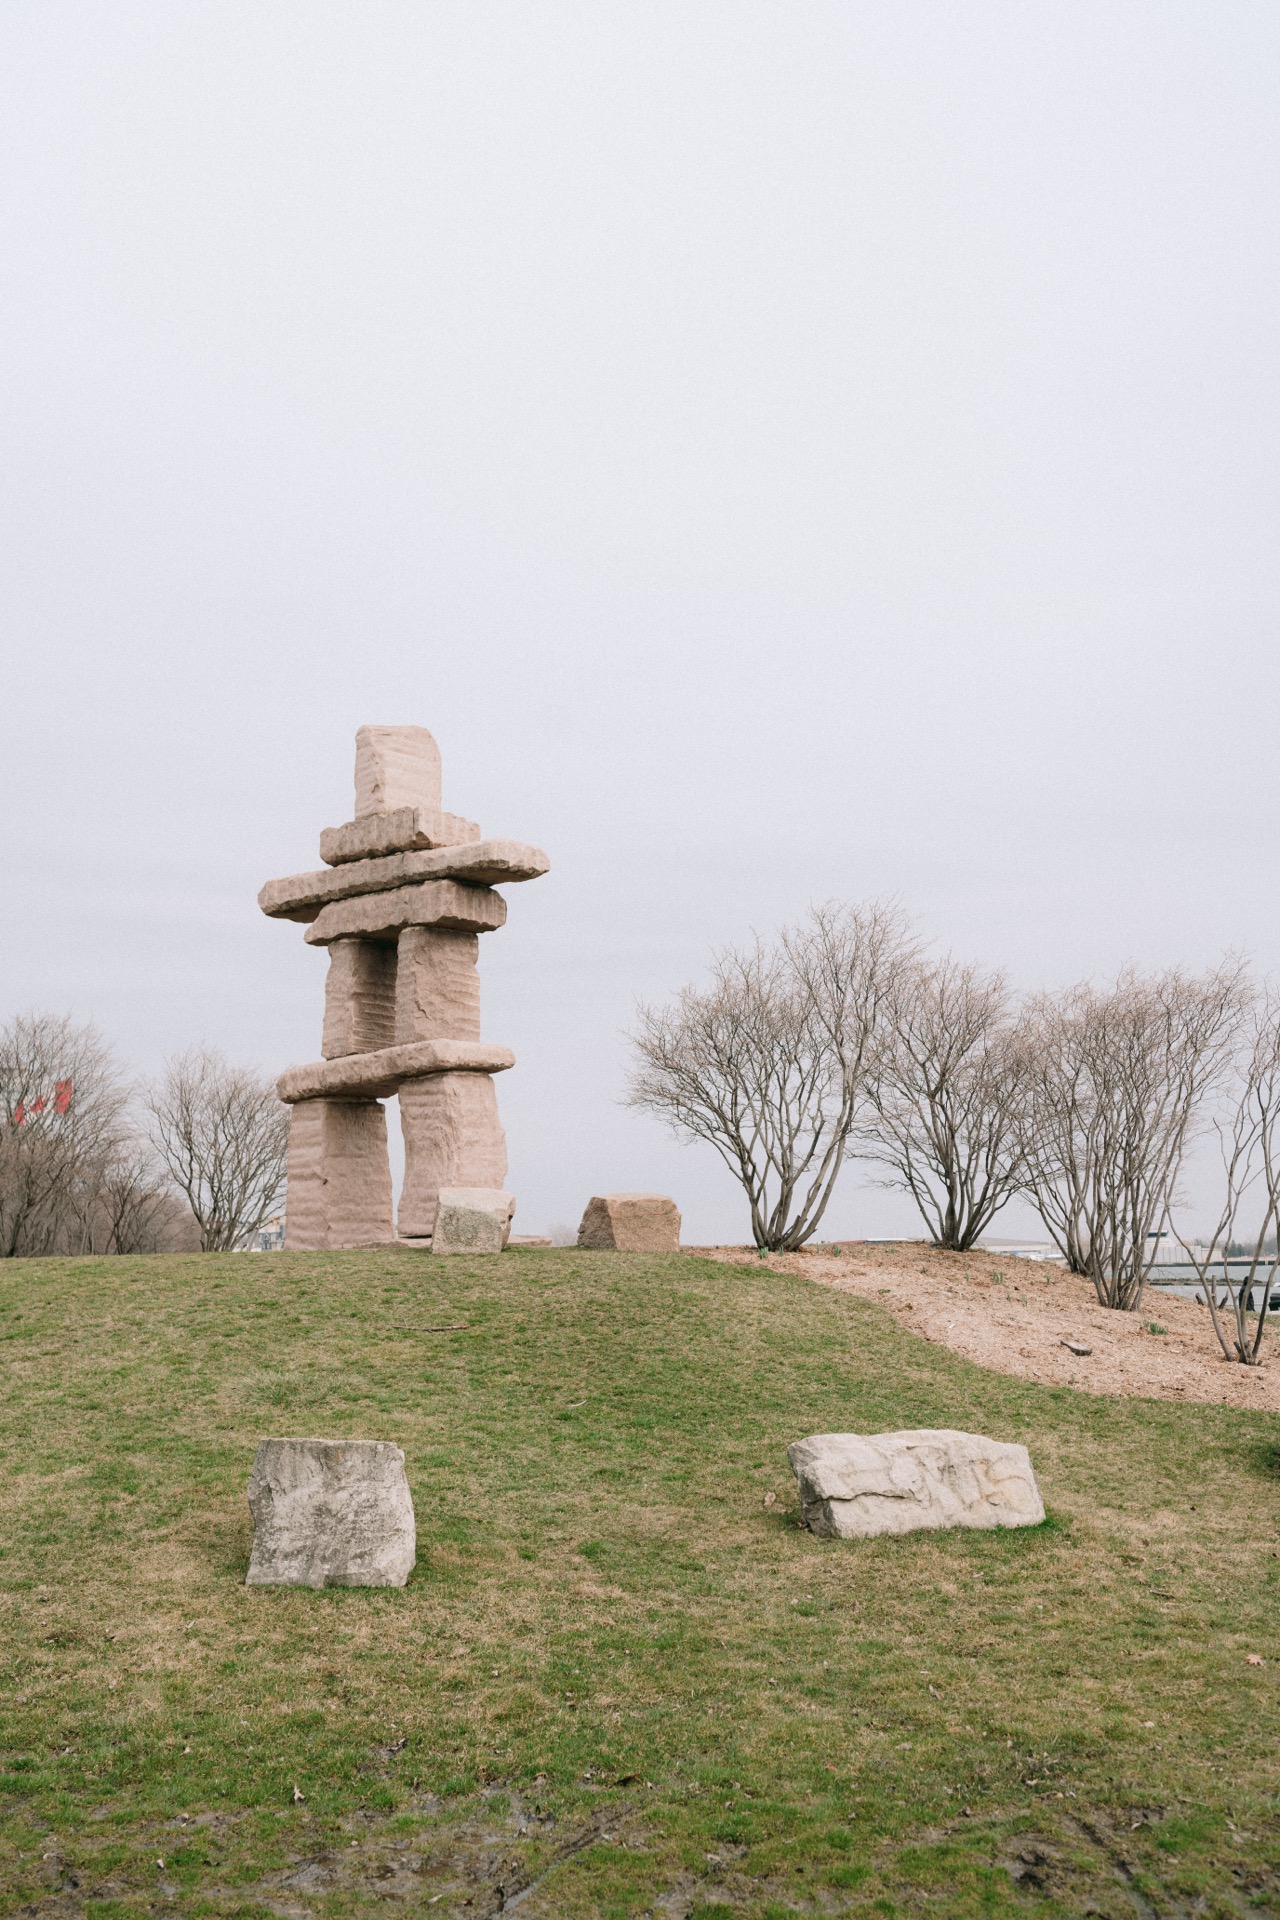 A stone inukshuk structure standing in a grassy area of Trillium Park with leafless trees and an overcast sky in the background